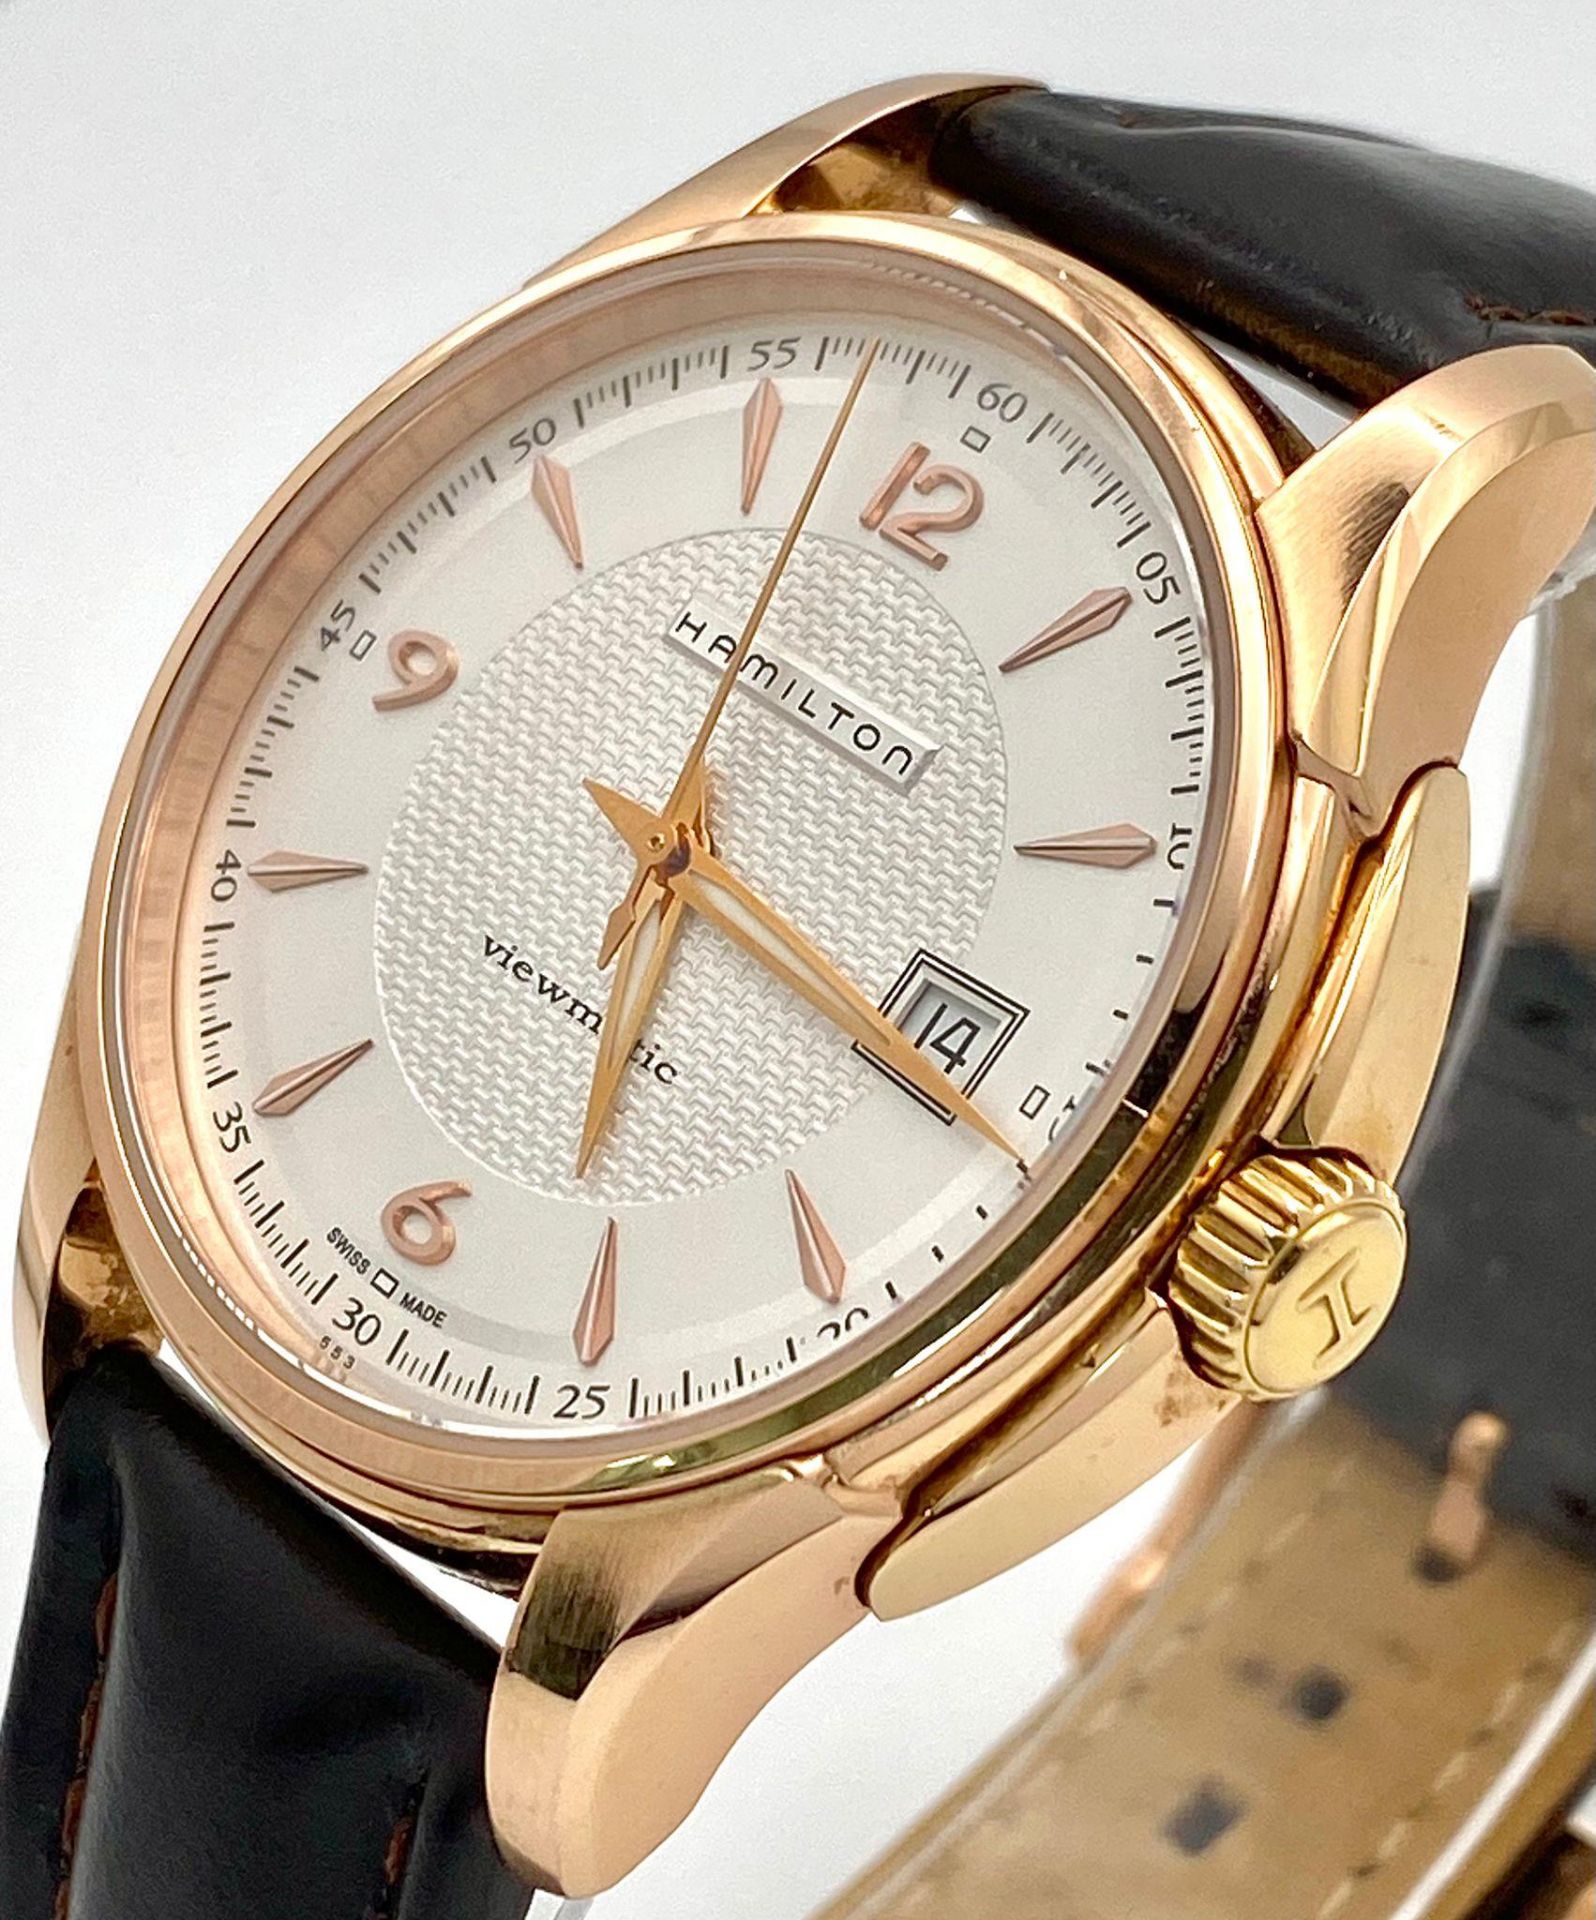 An Excellent Condition Hamilton Viewmatic Jazzmaster Rose Gold Plated Automatic Date Watch Model - Image 4 of 9